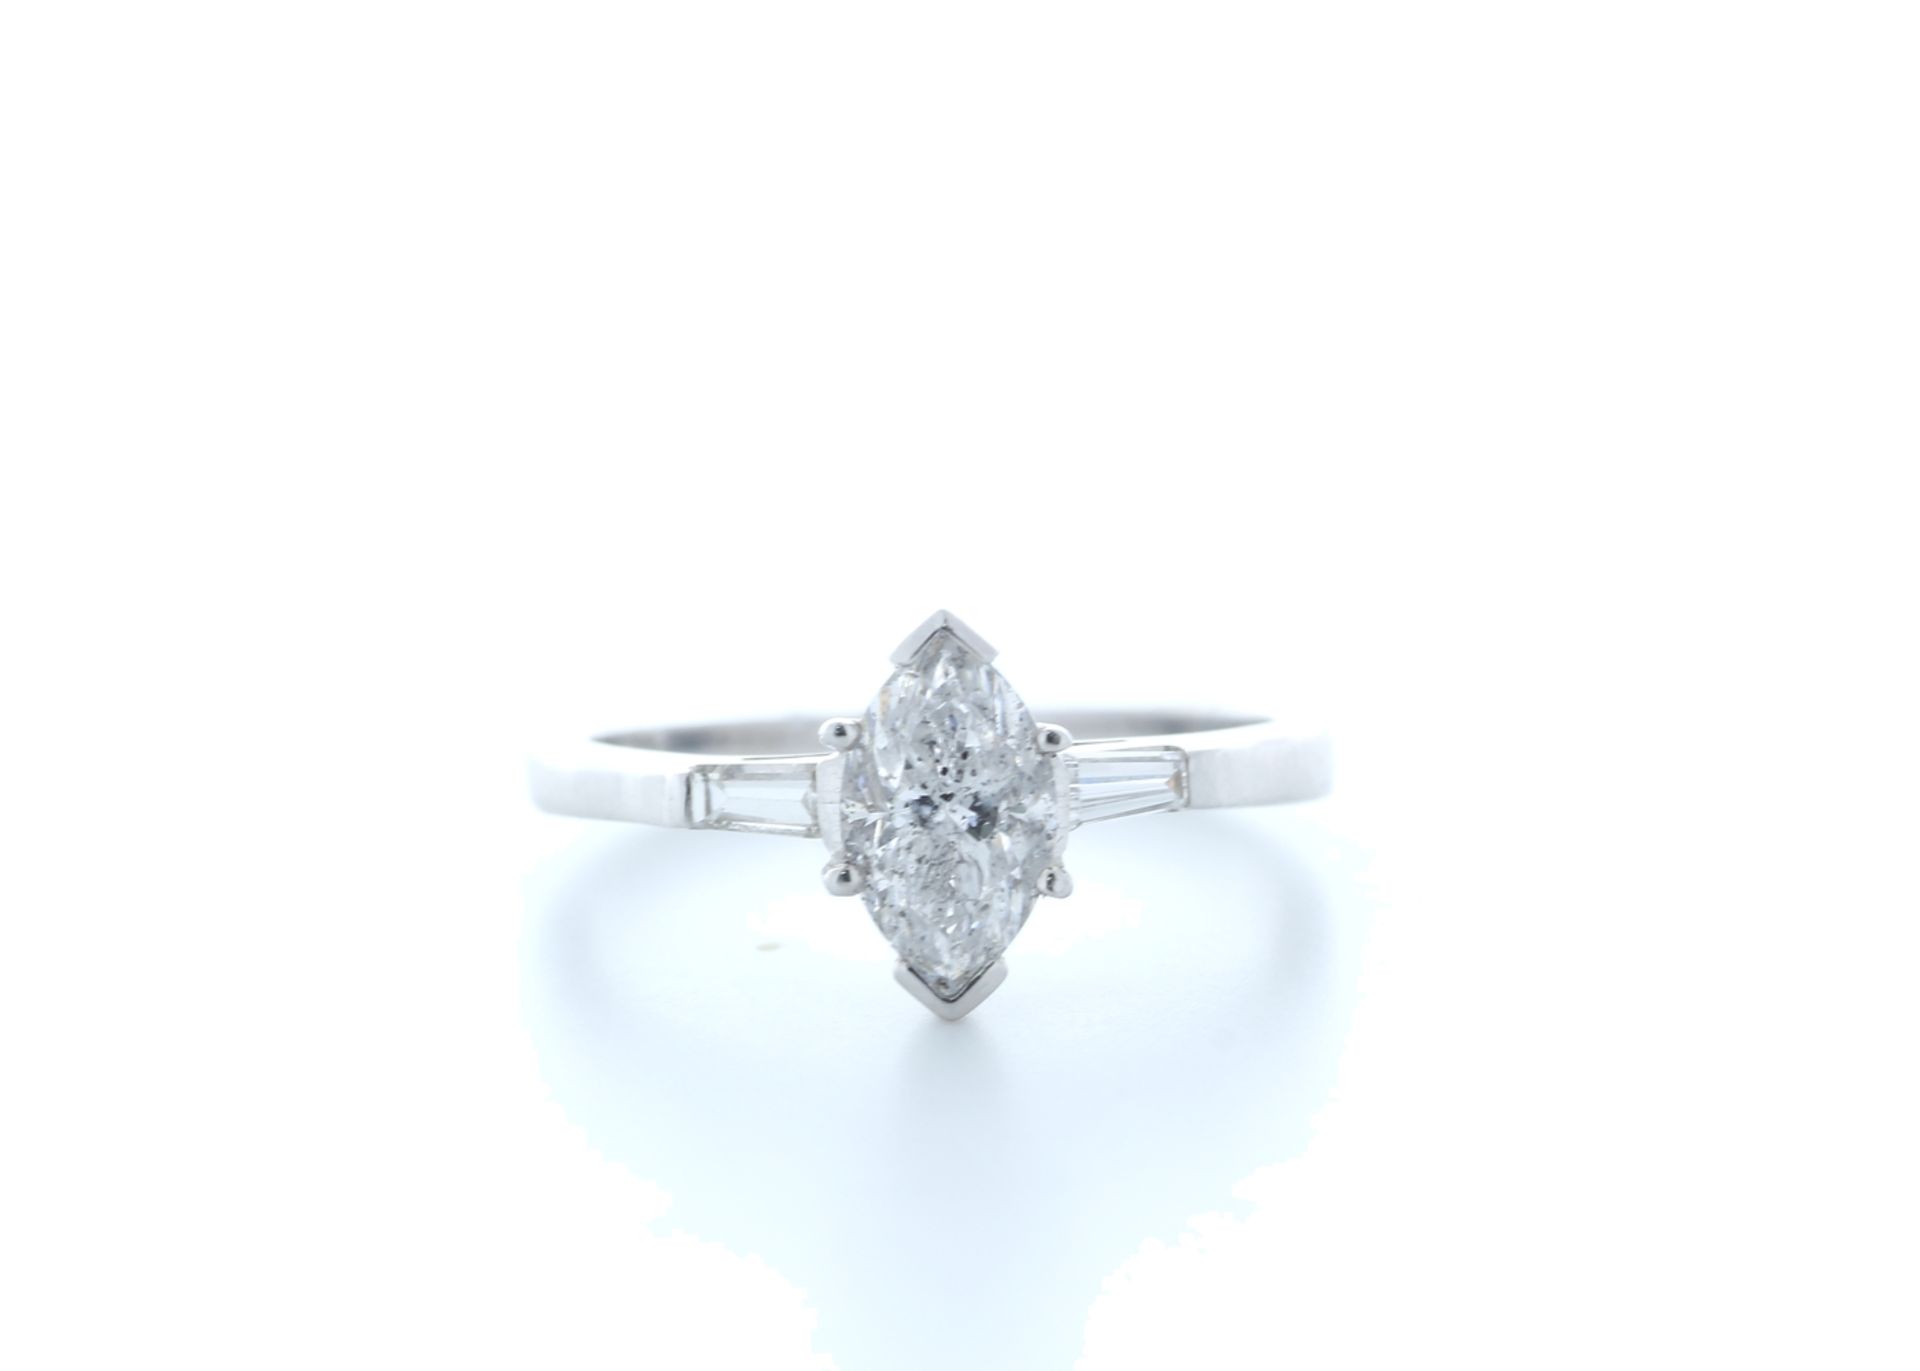 18ct White Gold Marquise Diamond With Stone Set Shoulders 1.22 Carats Carats - Valued by IDI £12,